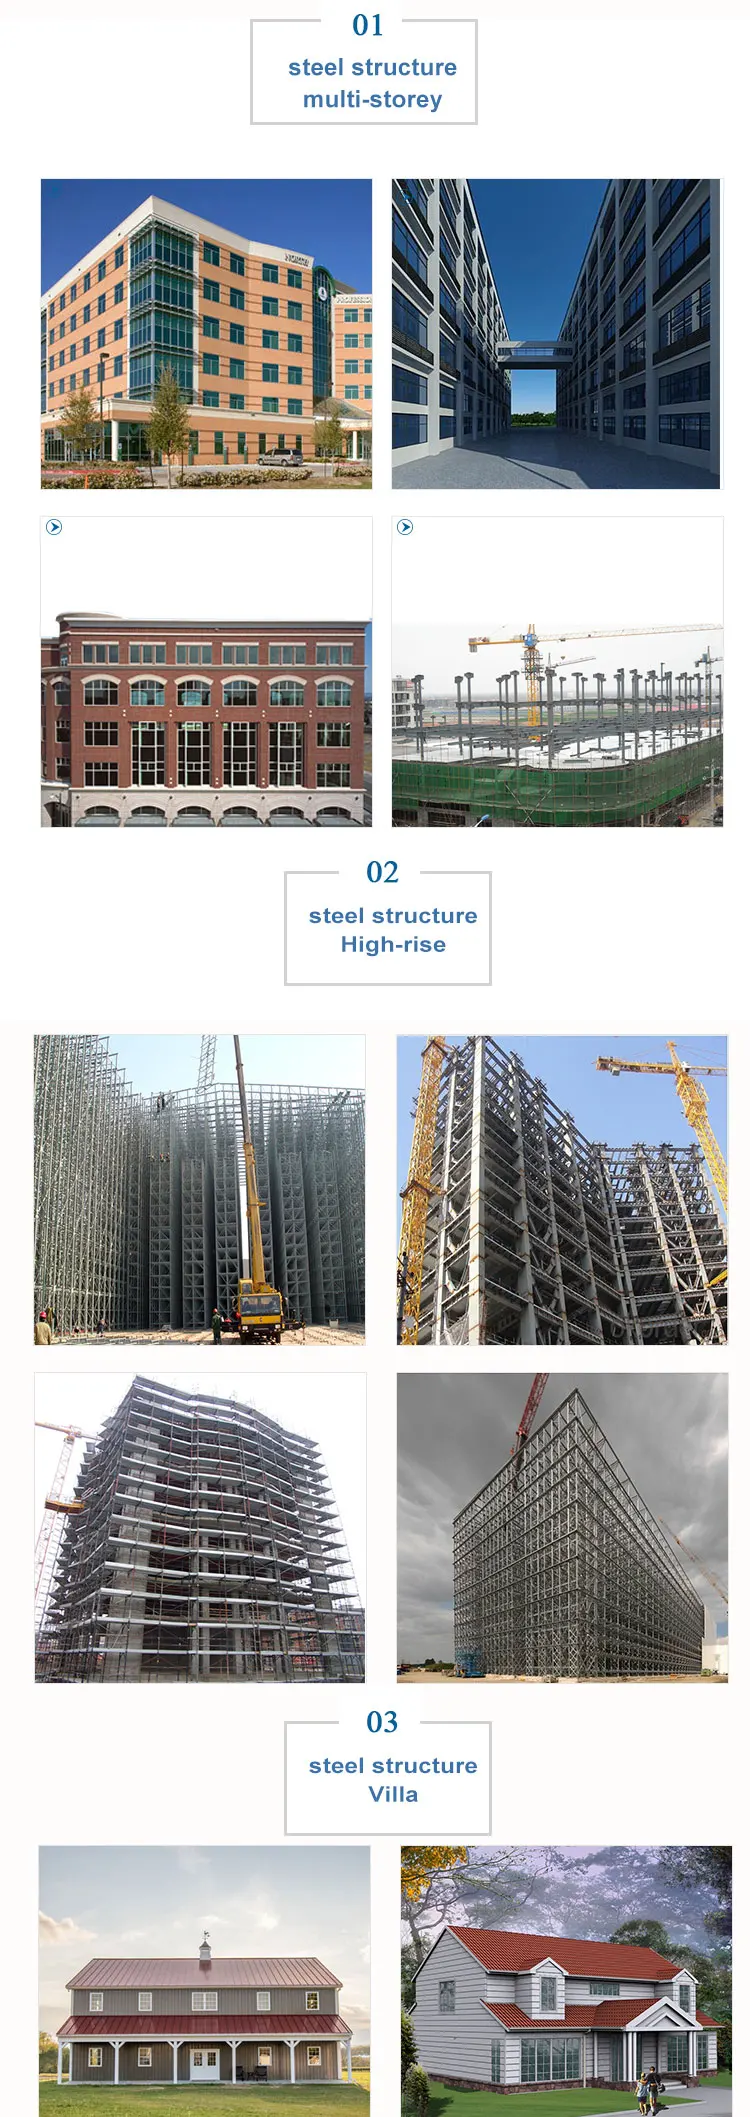 Grand High Rise Airport Steel Structure Building